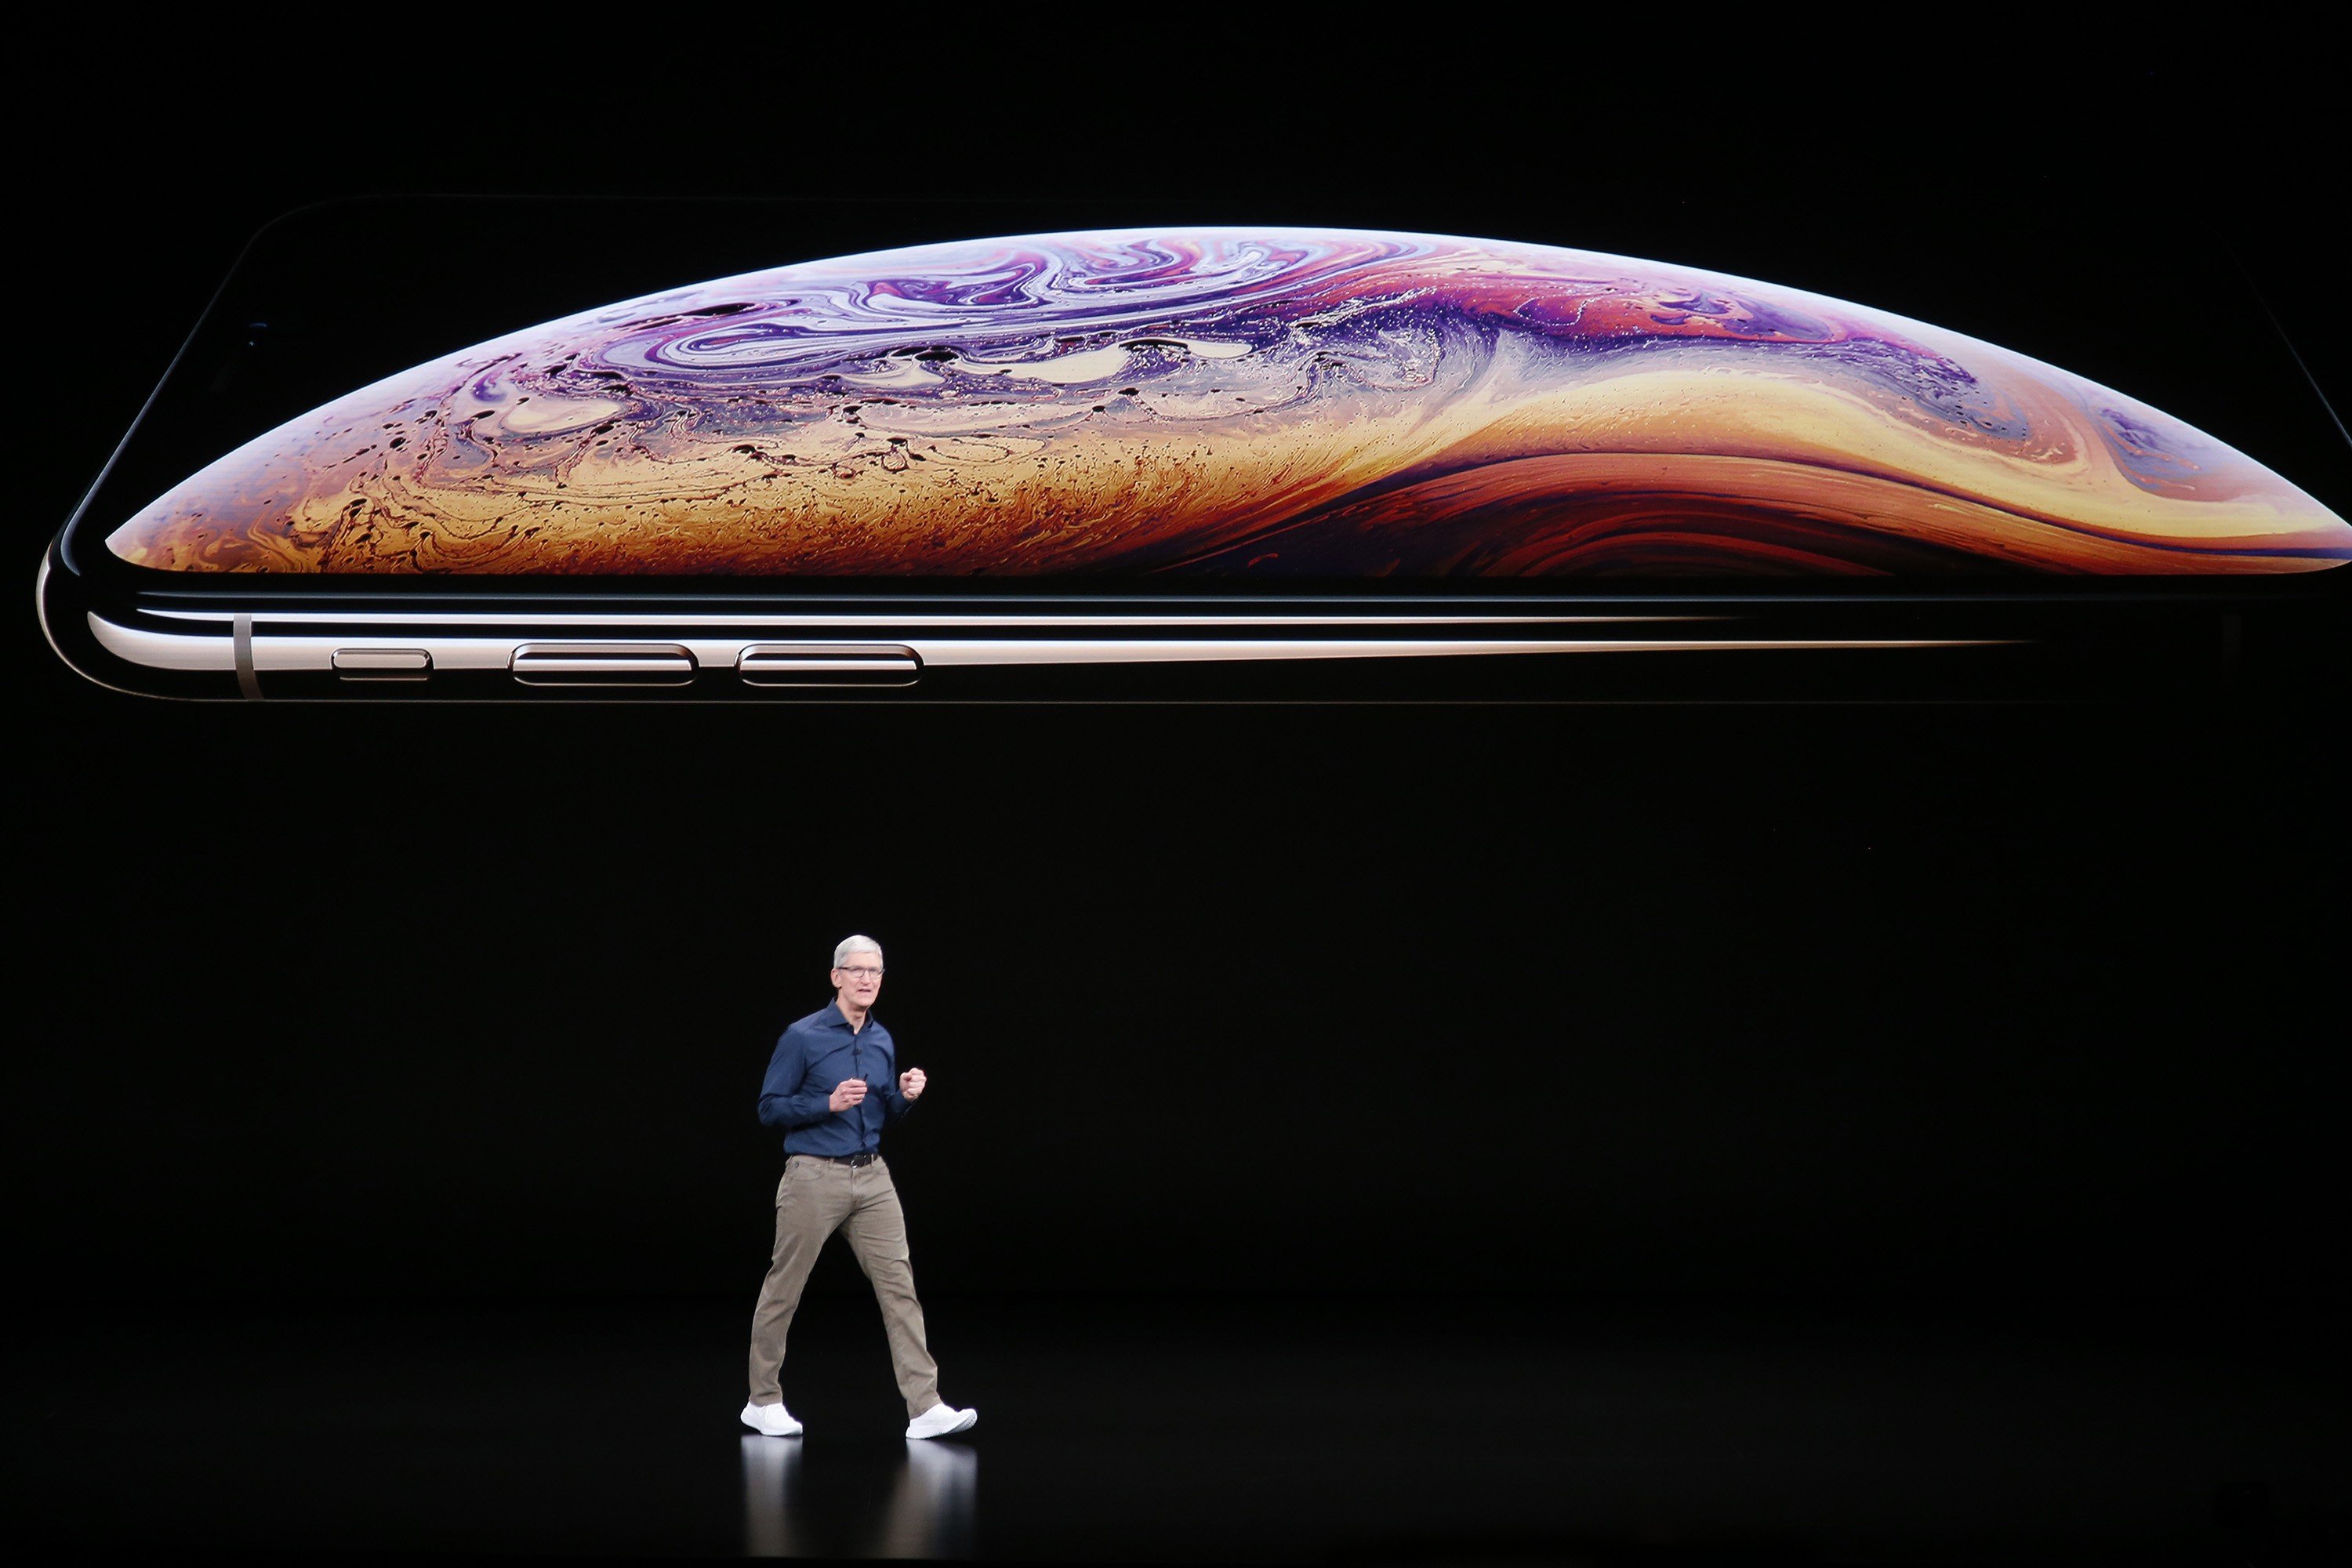 Tim Cook introduces Apple’s new smartphone, the iPhone Xs, on September 12, at the company headquarters in Cupertino, California. The world’s most valuable company, Apple owns virtually no tangible assets. Photo: Bay Area News Group/TNS